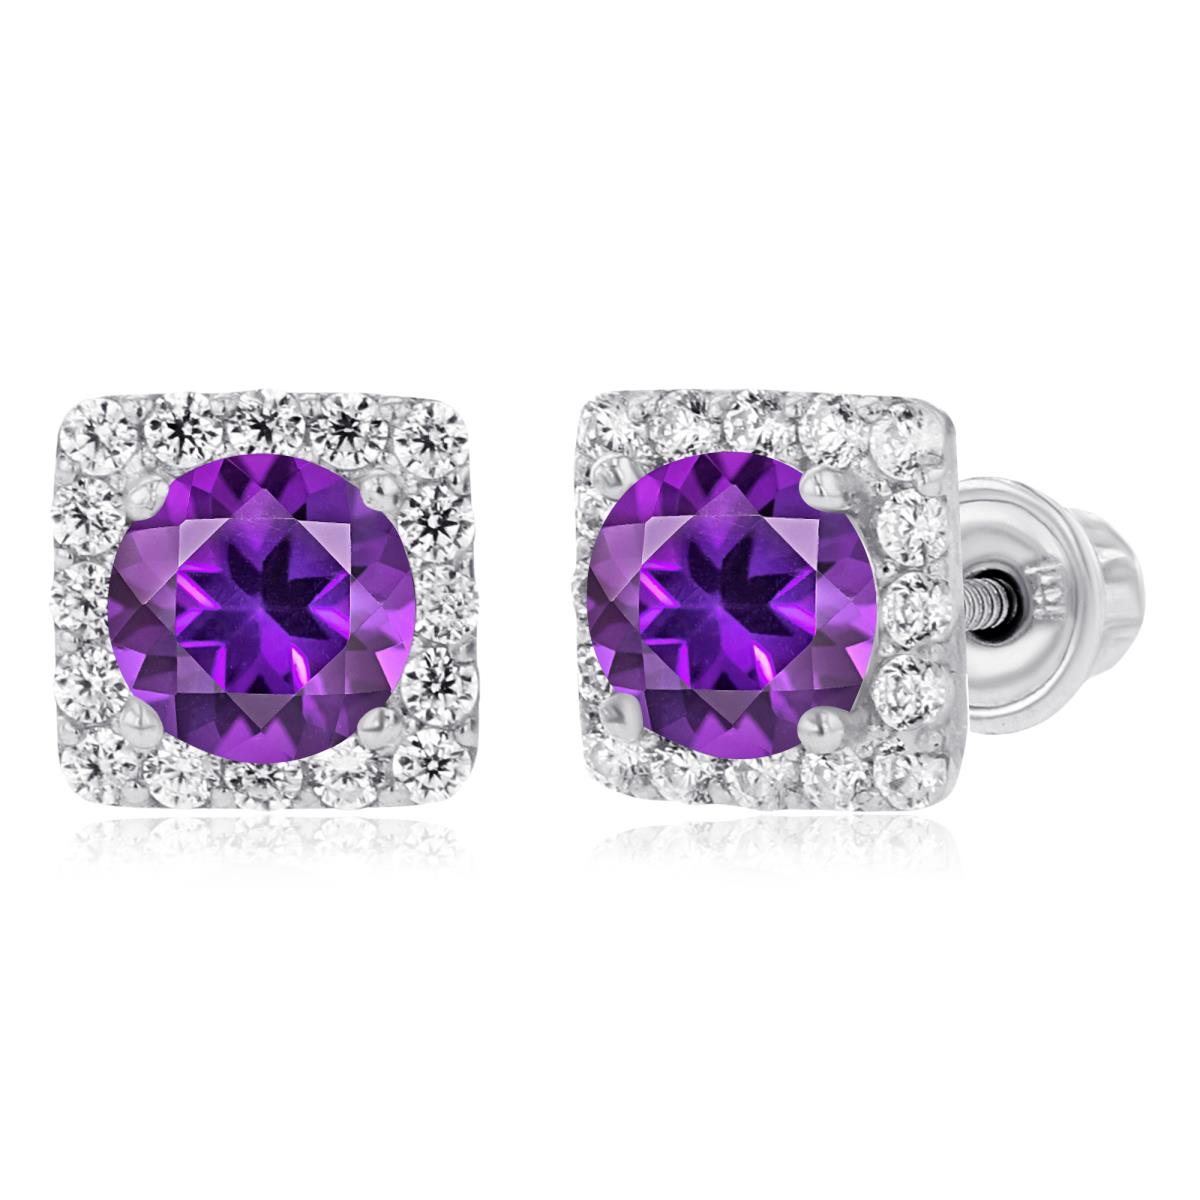 14K White Gold 4mm Amethyst & 1mm Created White Sapphire Square Halo Screwback Earrings